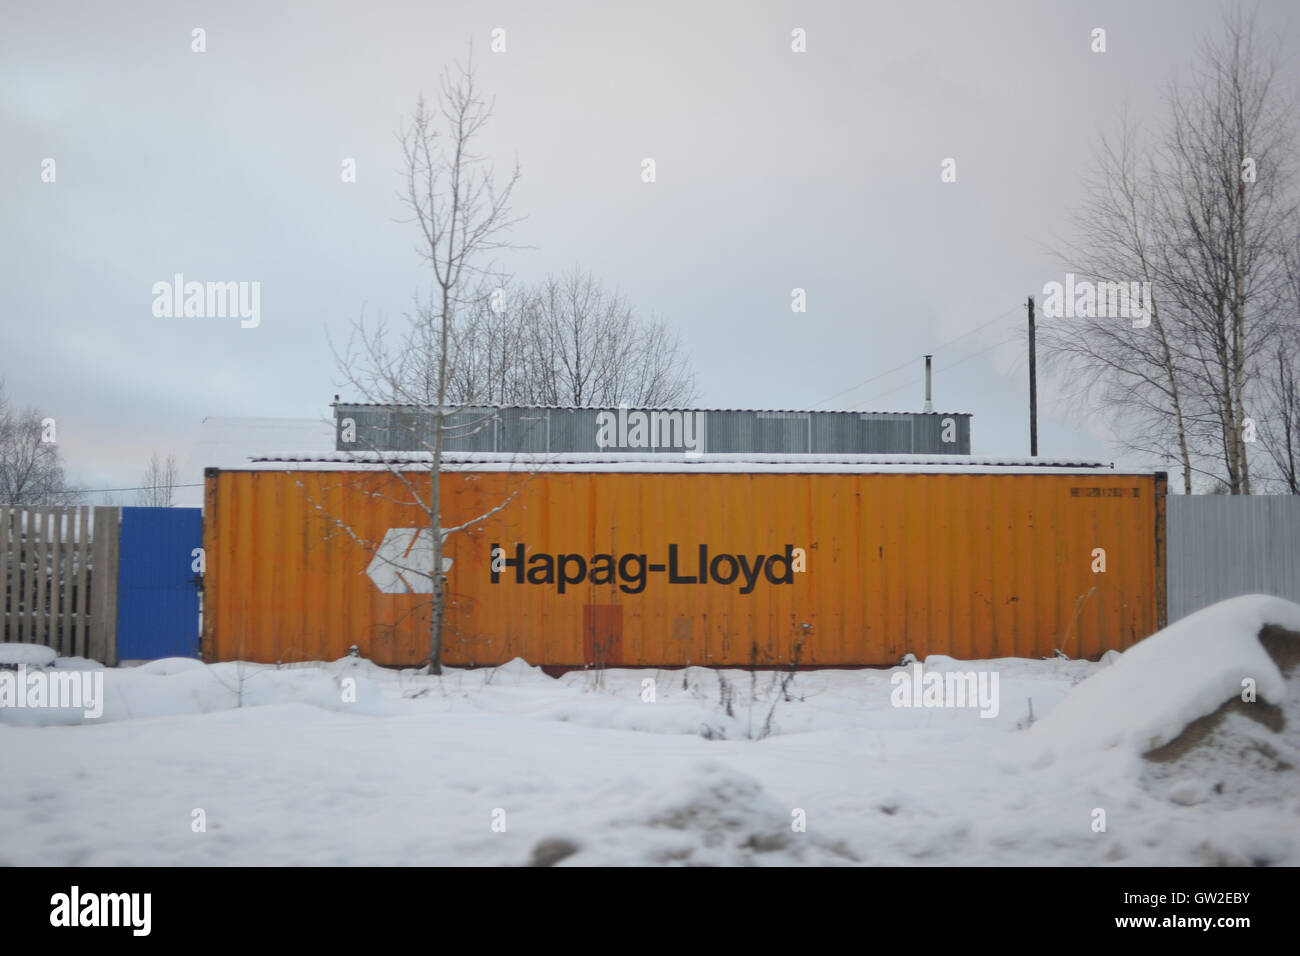 The container shipping company Hapag-Lloyd used as fence in Krasnozatonskiy, Komi Republic, Russia, Europe Stock Photo